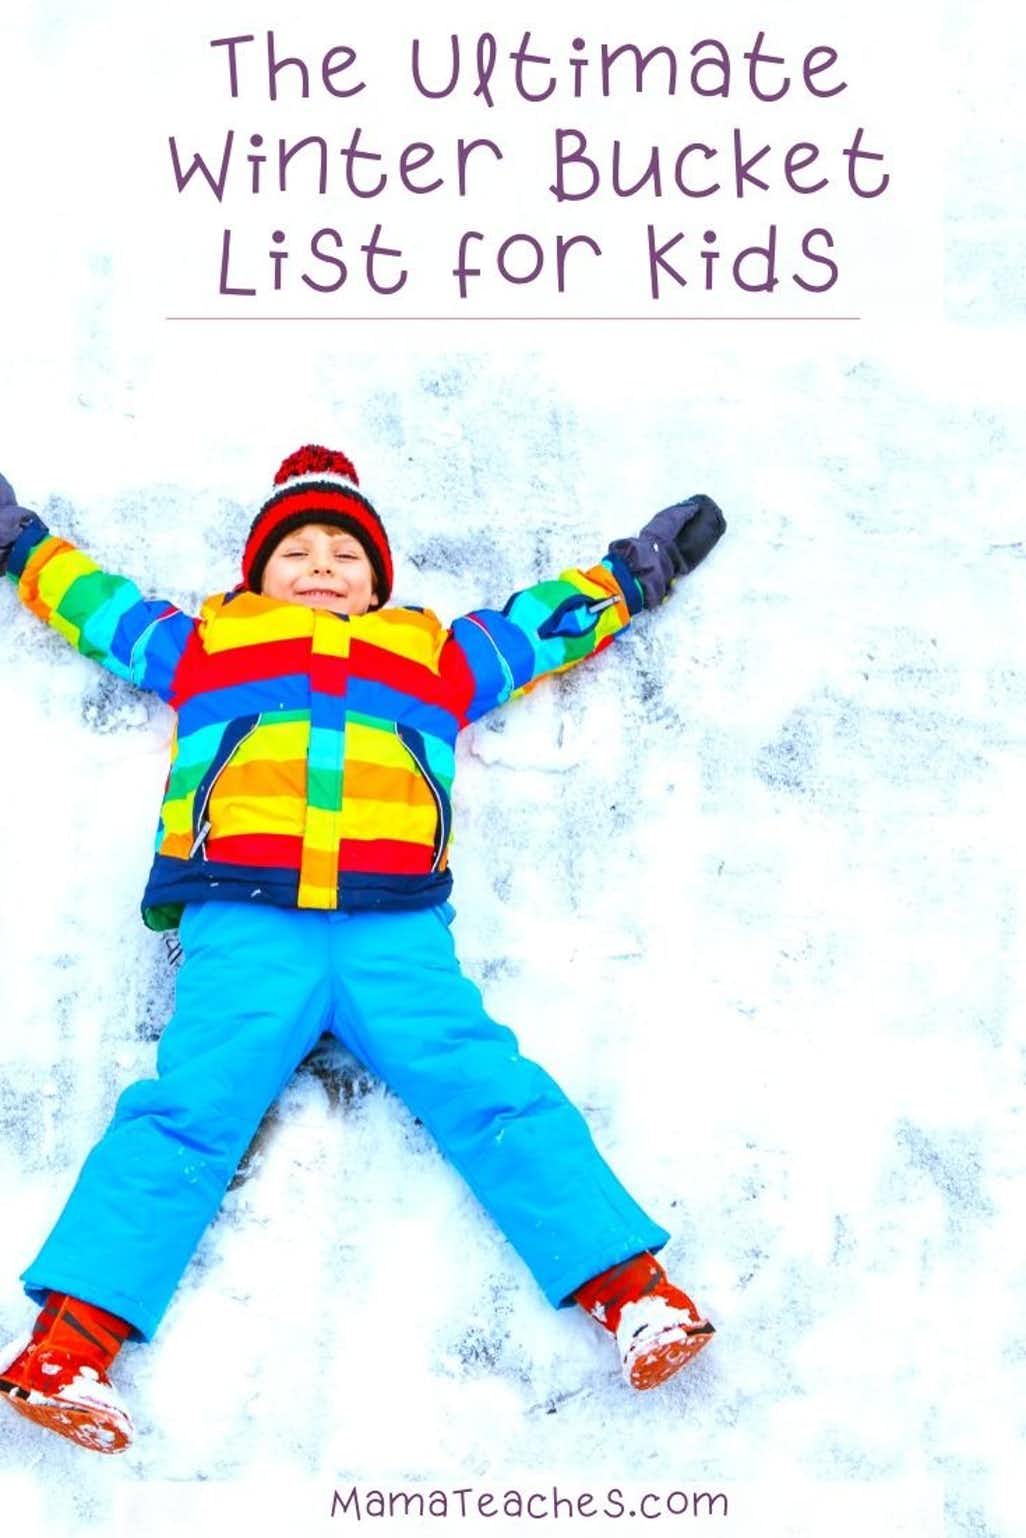 The Ultimate Winter Bucket List for Kids